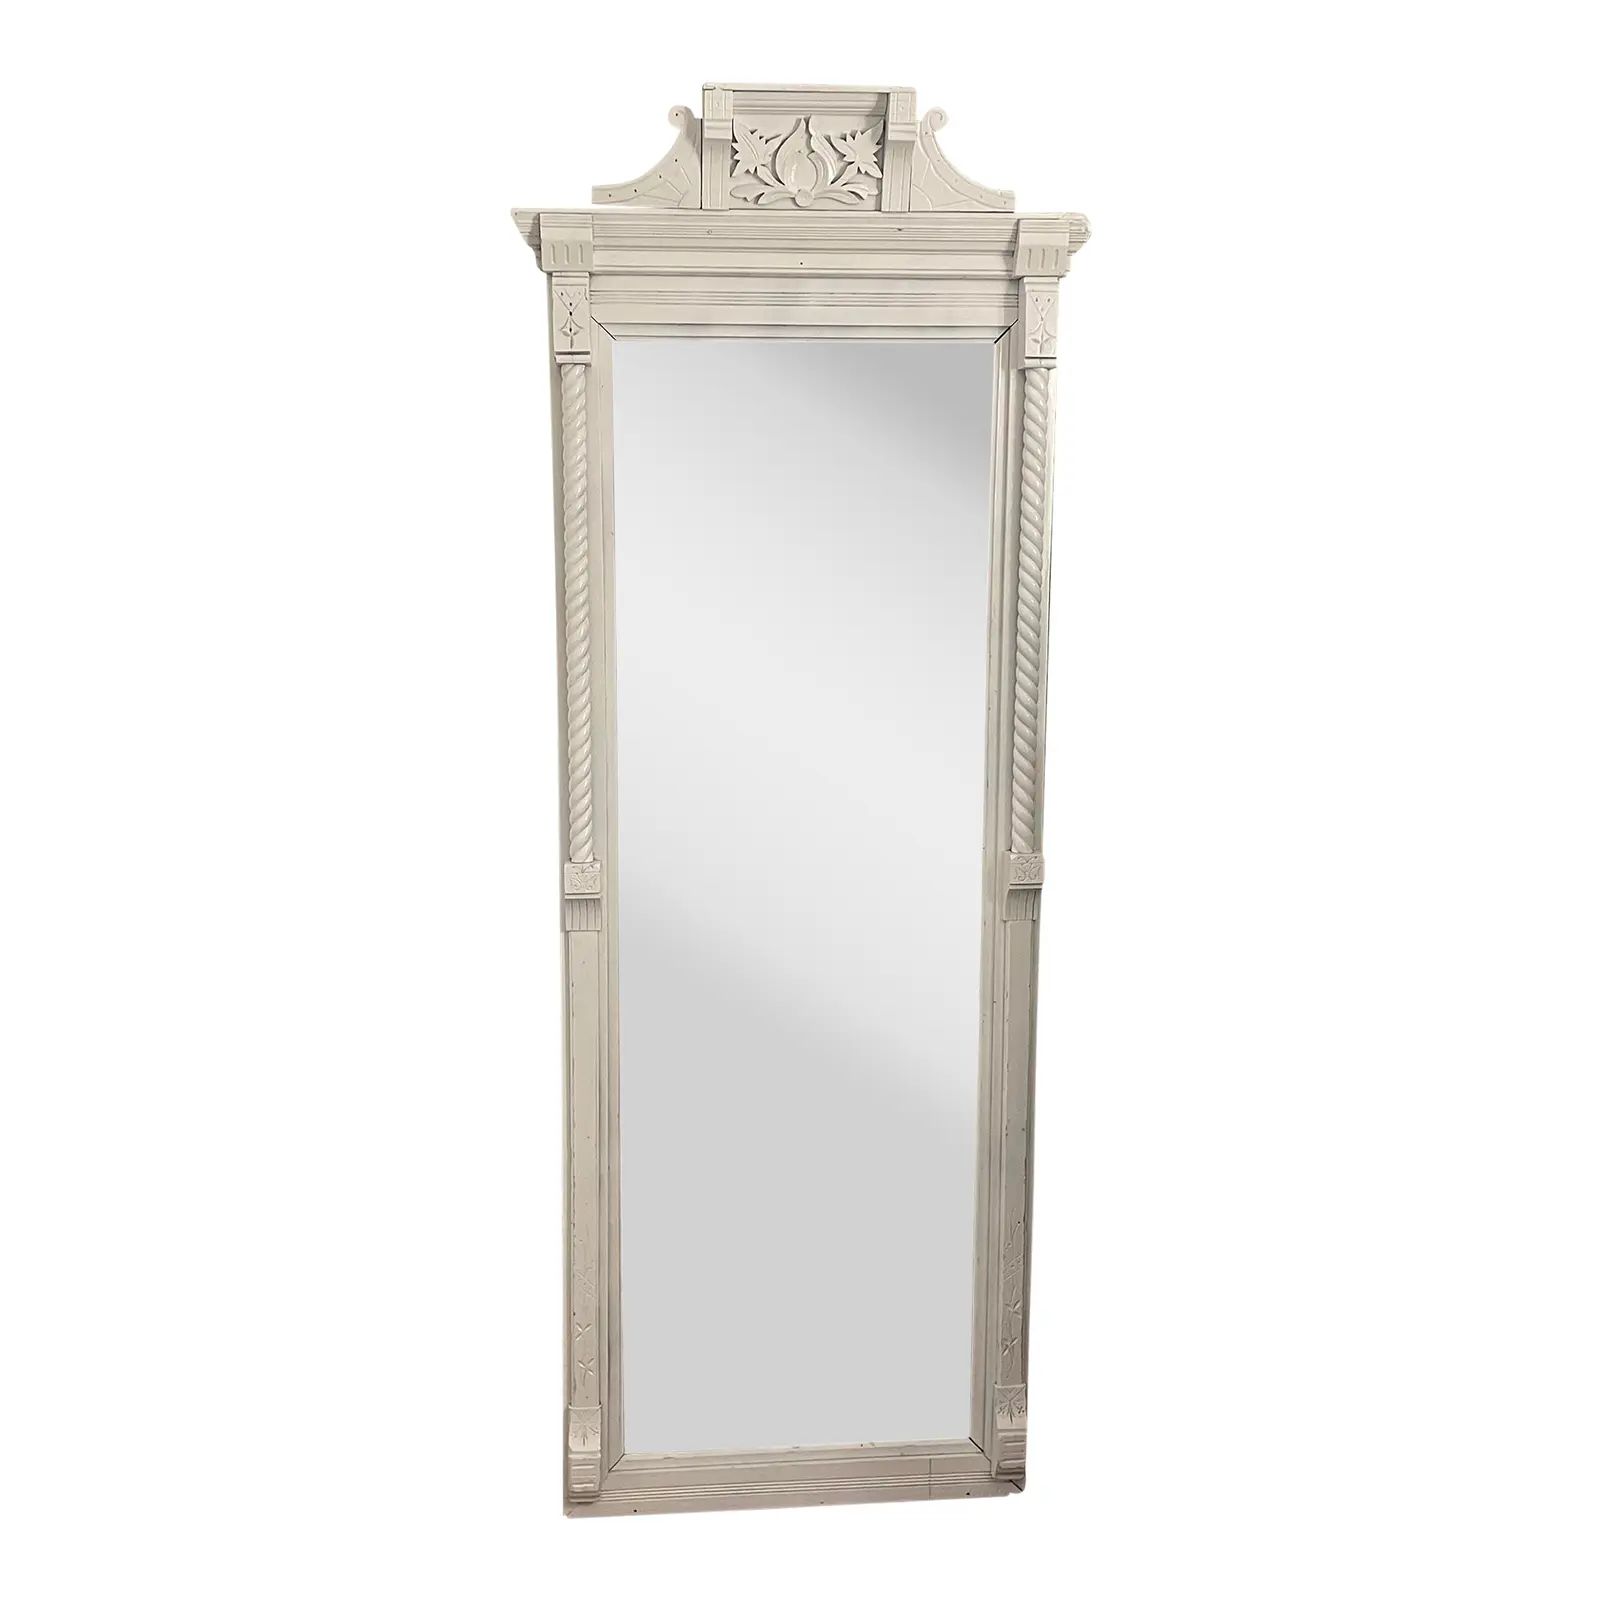 19th Century Victorian Eastlake Pier/Hall Mirror With White Lacquer | Chairish